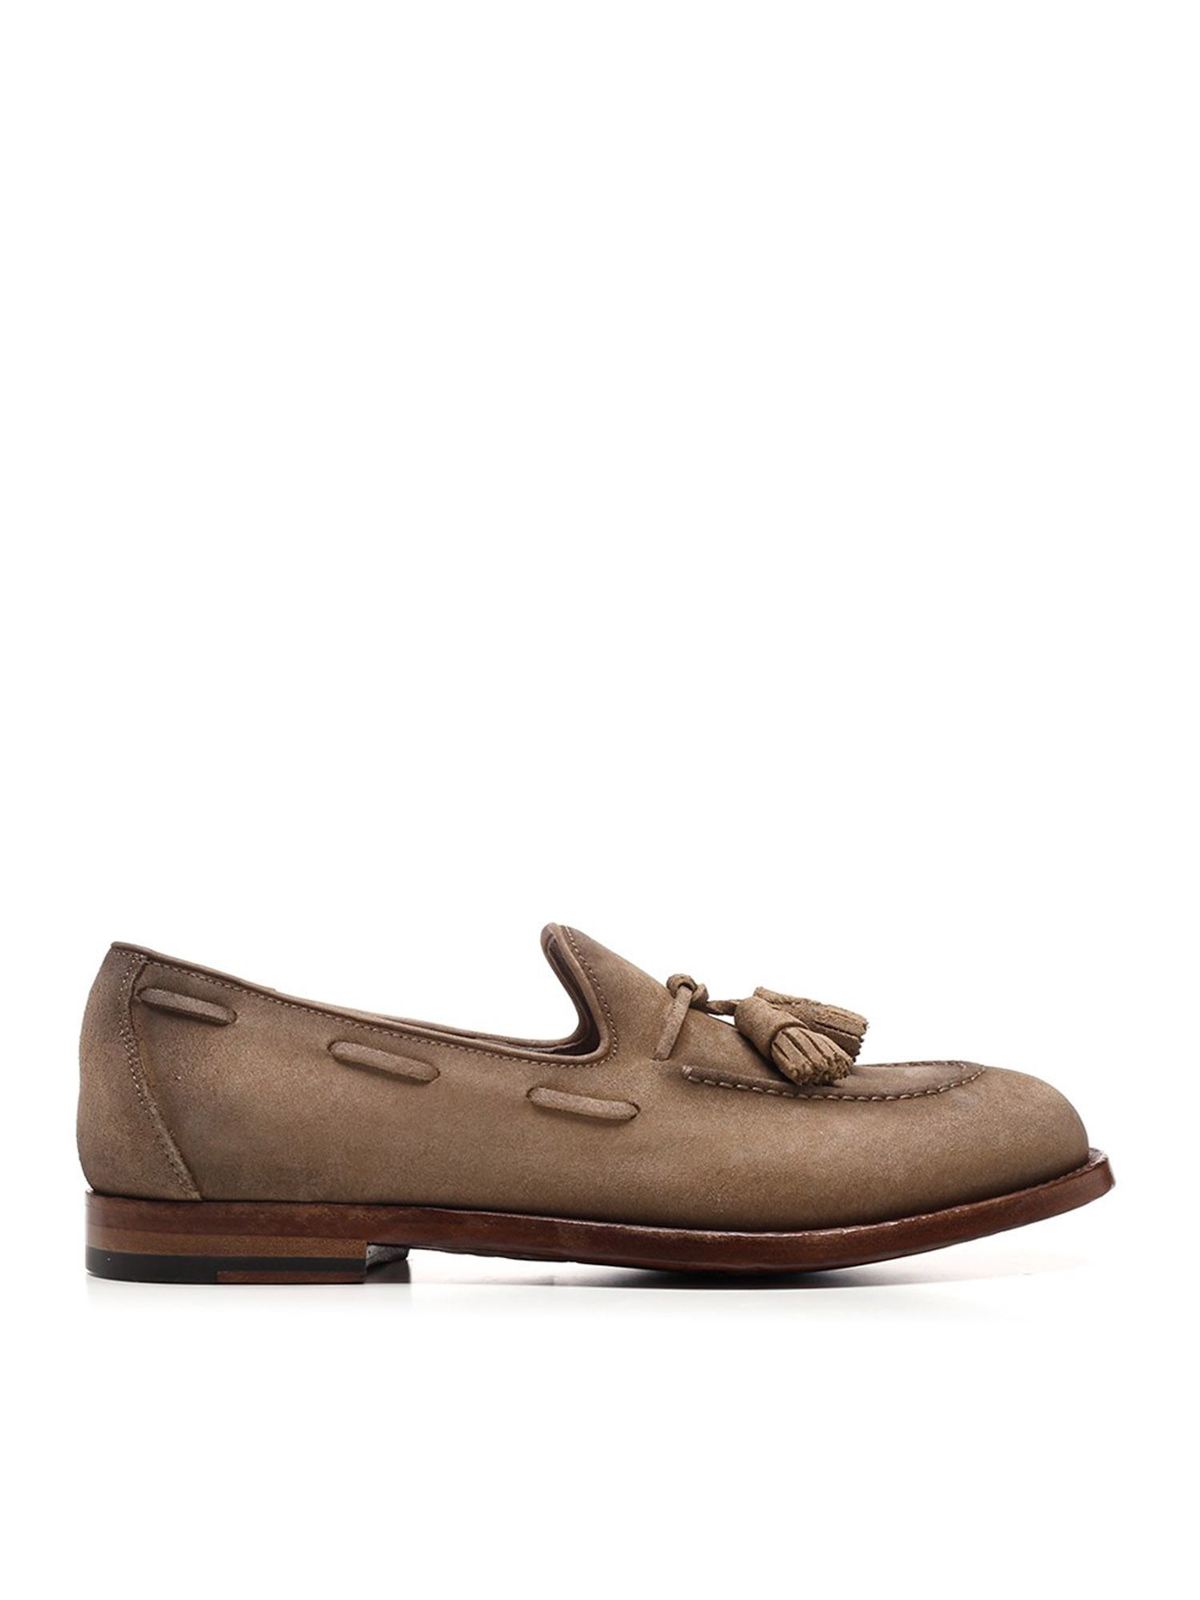 OFFICINE CREATIVE IVY 1 LOAFERS IN BEIGE